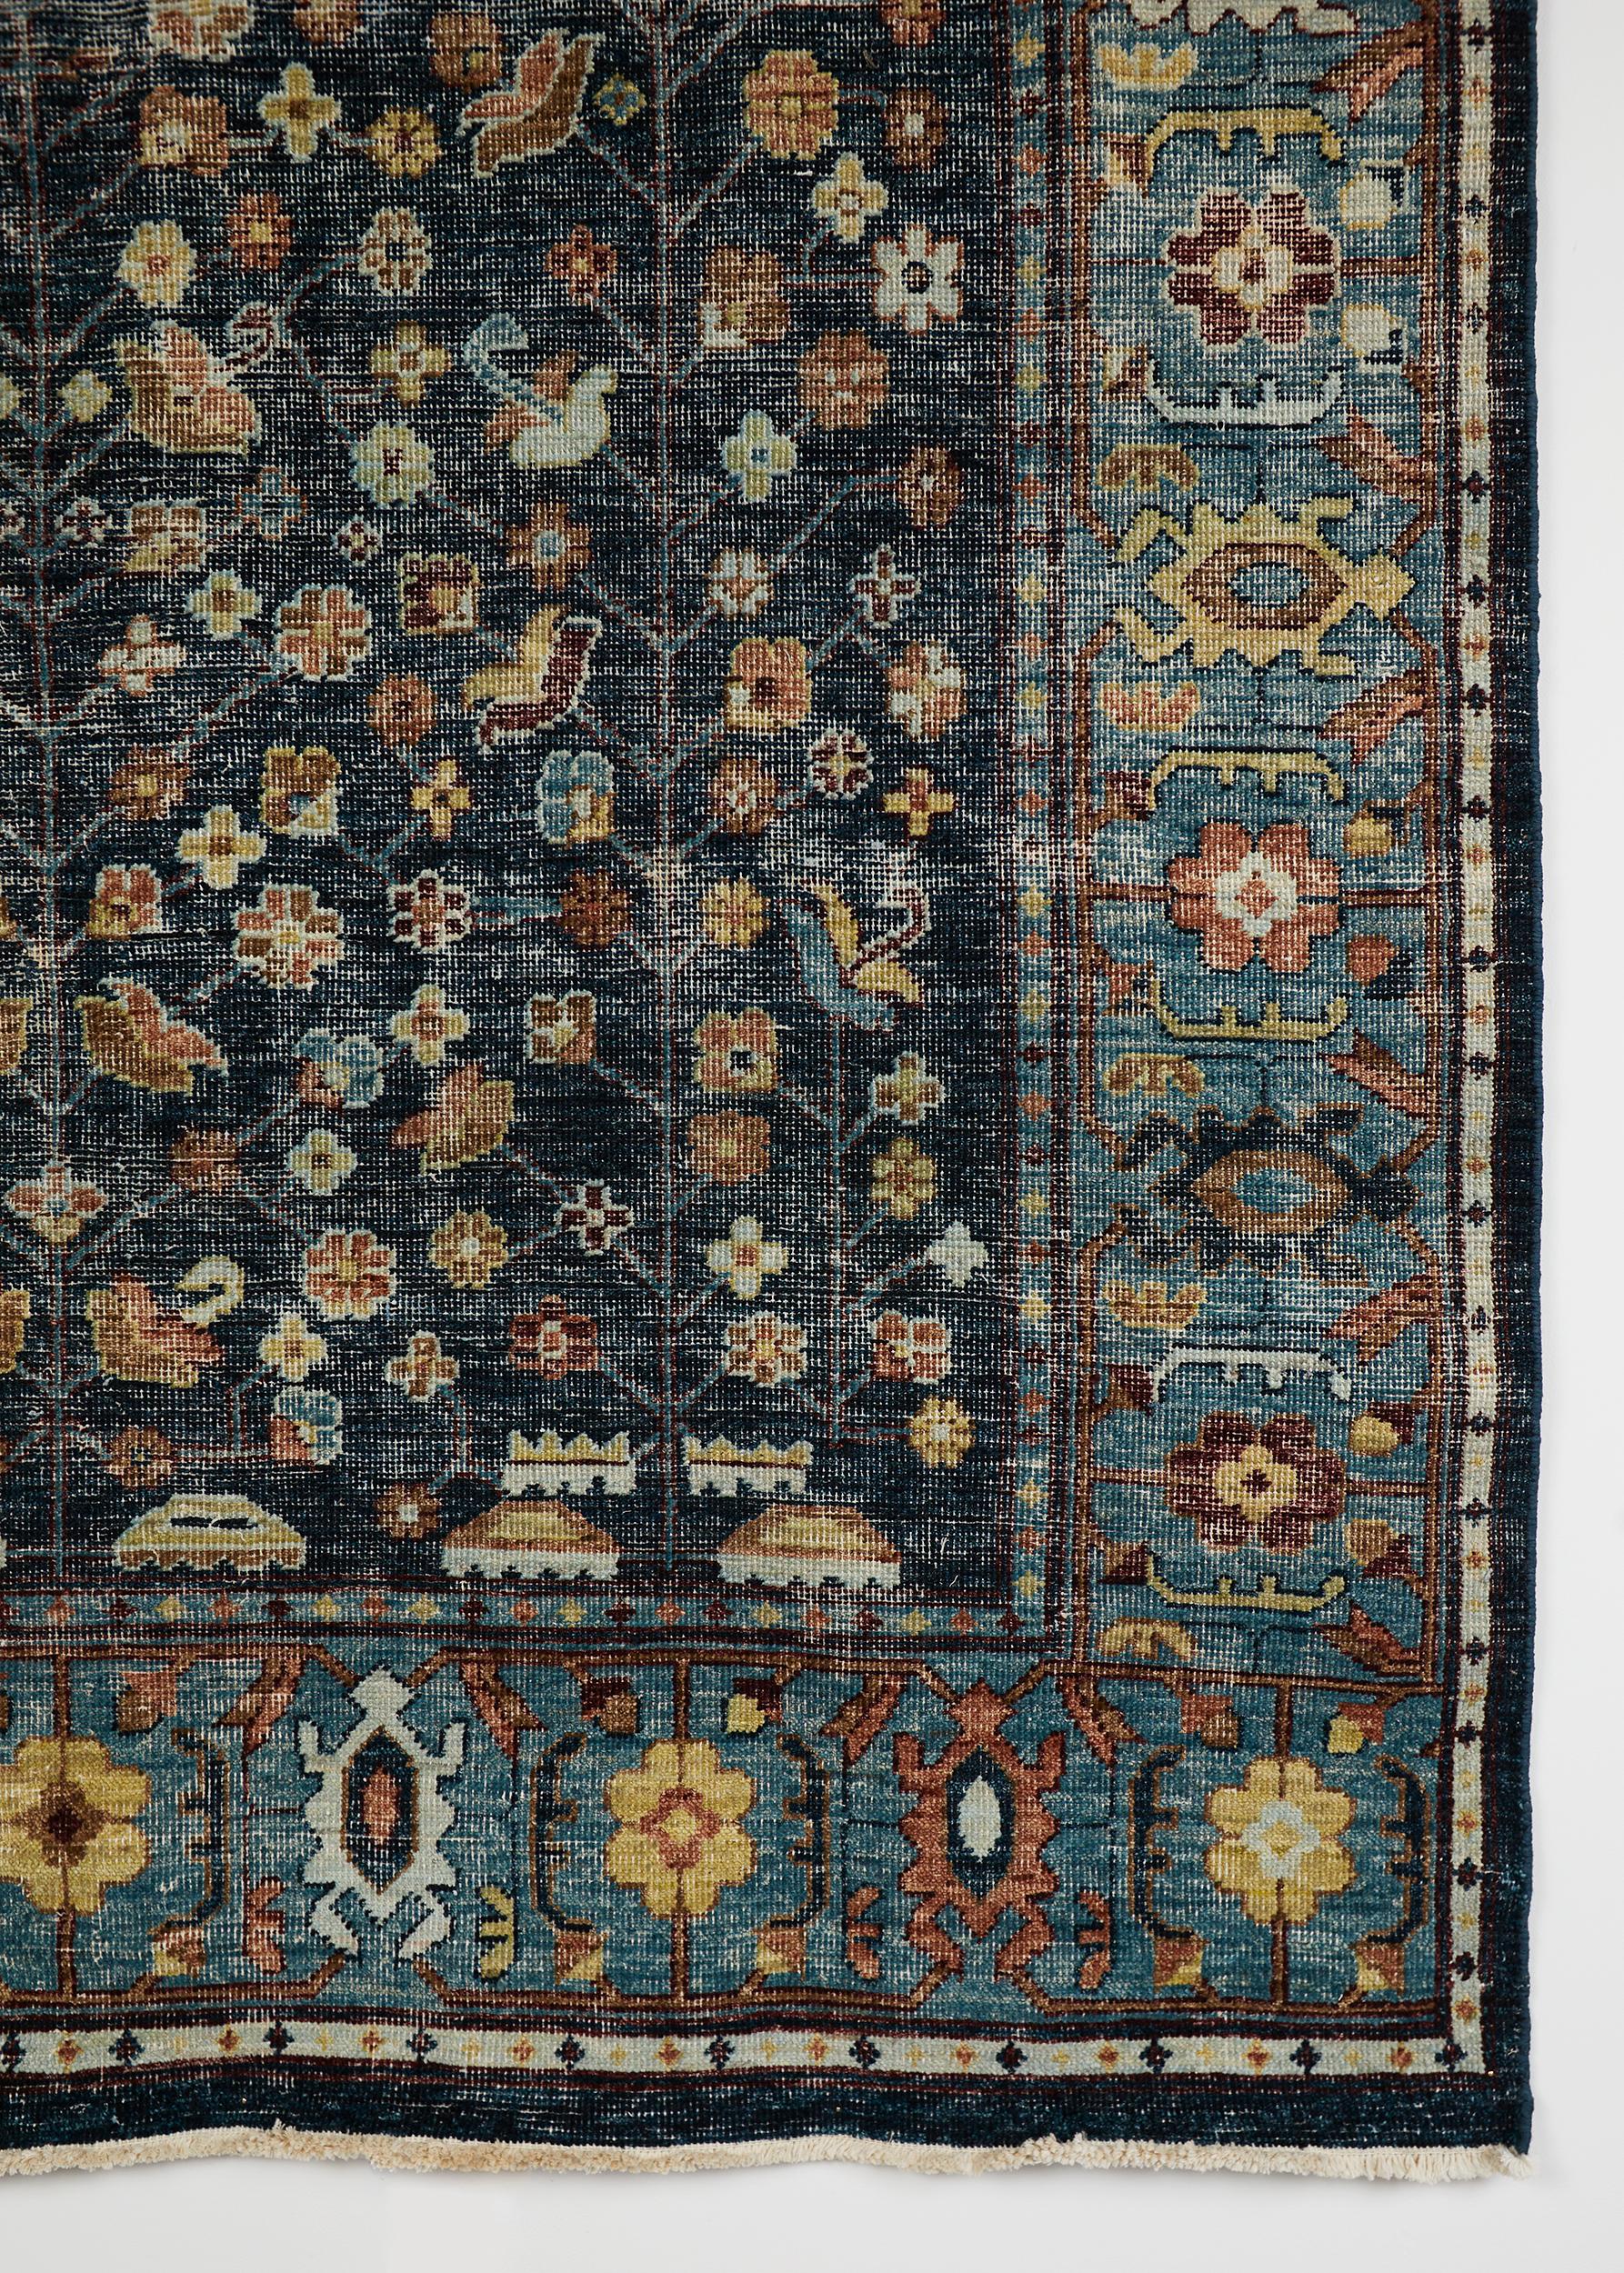 The Blue Moon Rug

A hand-knotted, 100% Ghazni Wool rug.

Made in Pakistan. 

This rug was designed to capture the spirit of one fine day in August, biking through the fields of Alentejo at dusk. Brushing up against wildflowers bathed in soft, cool